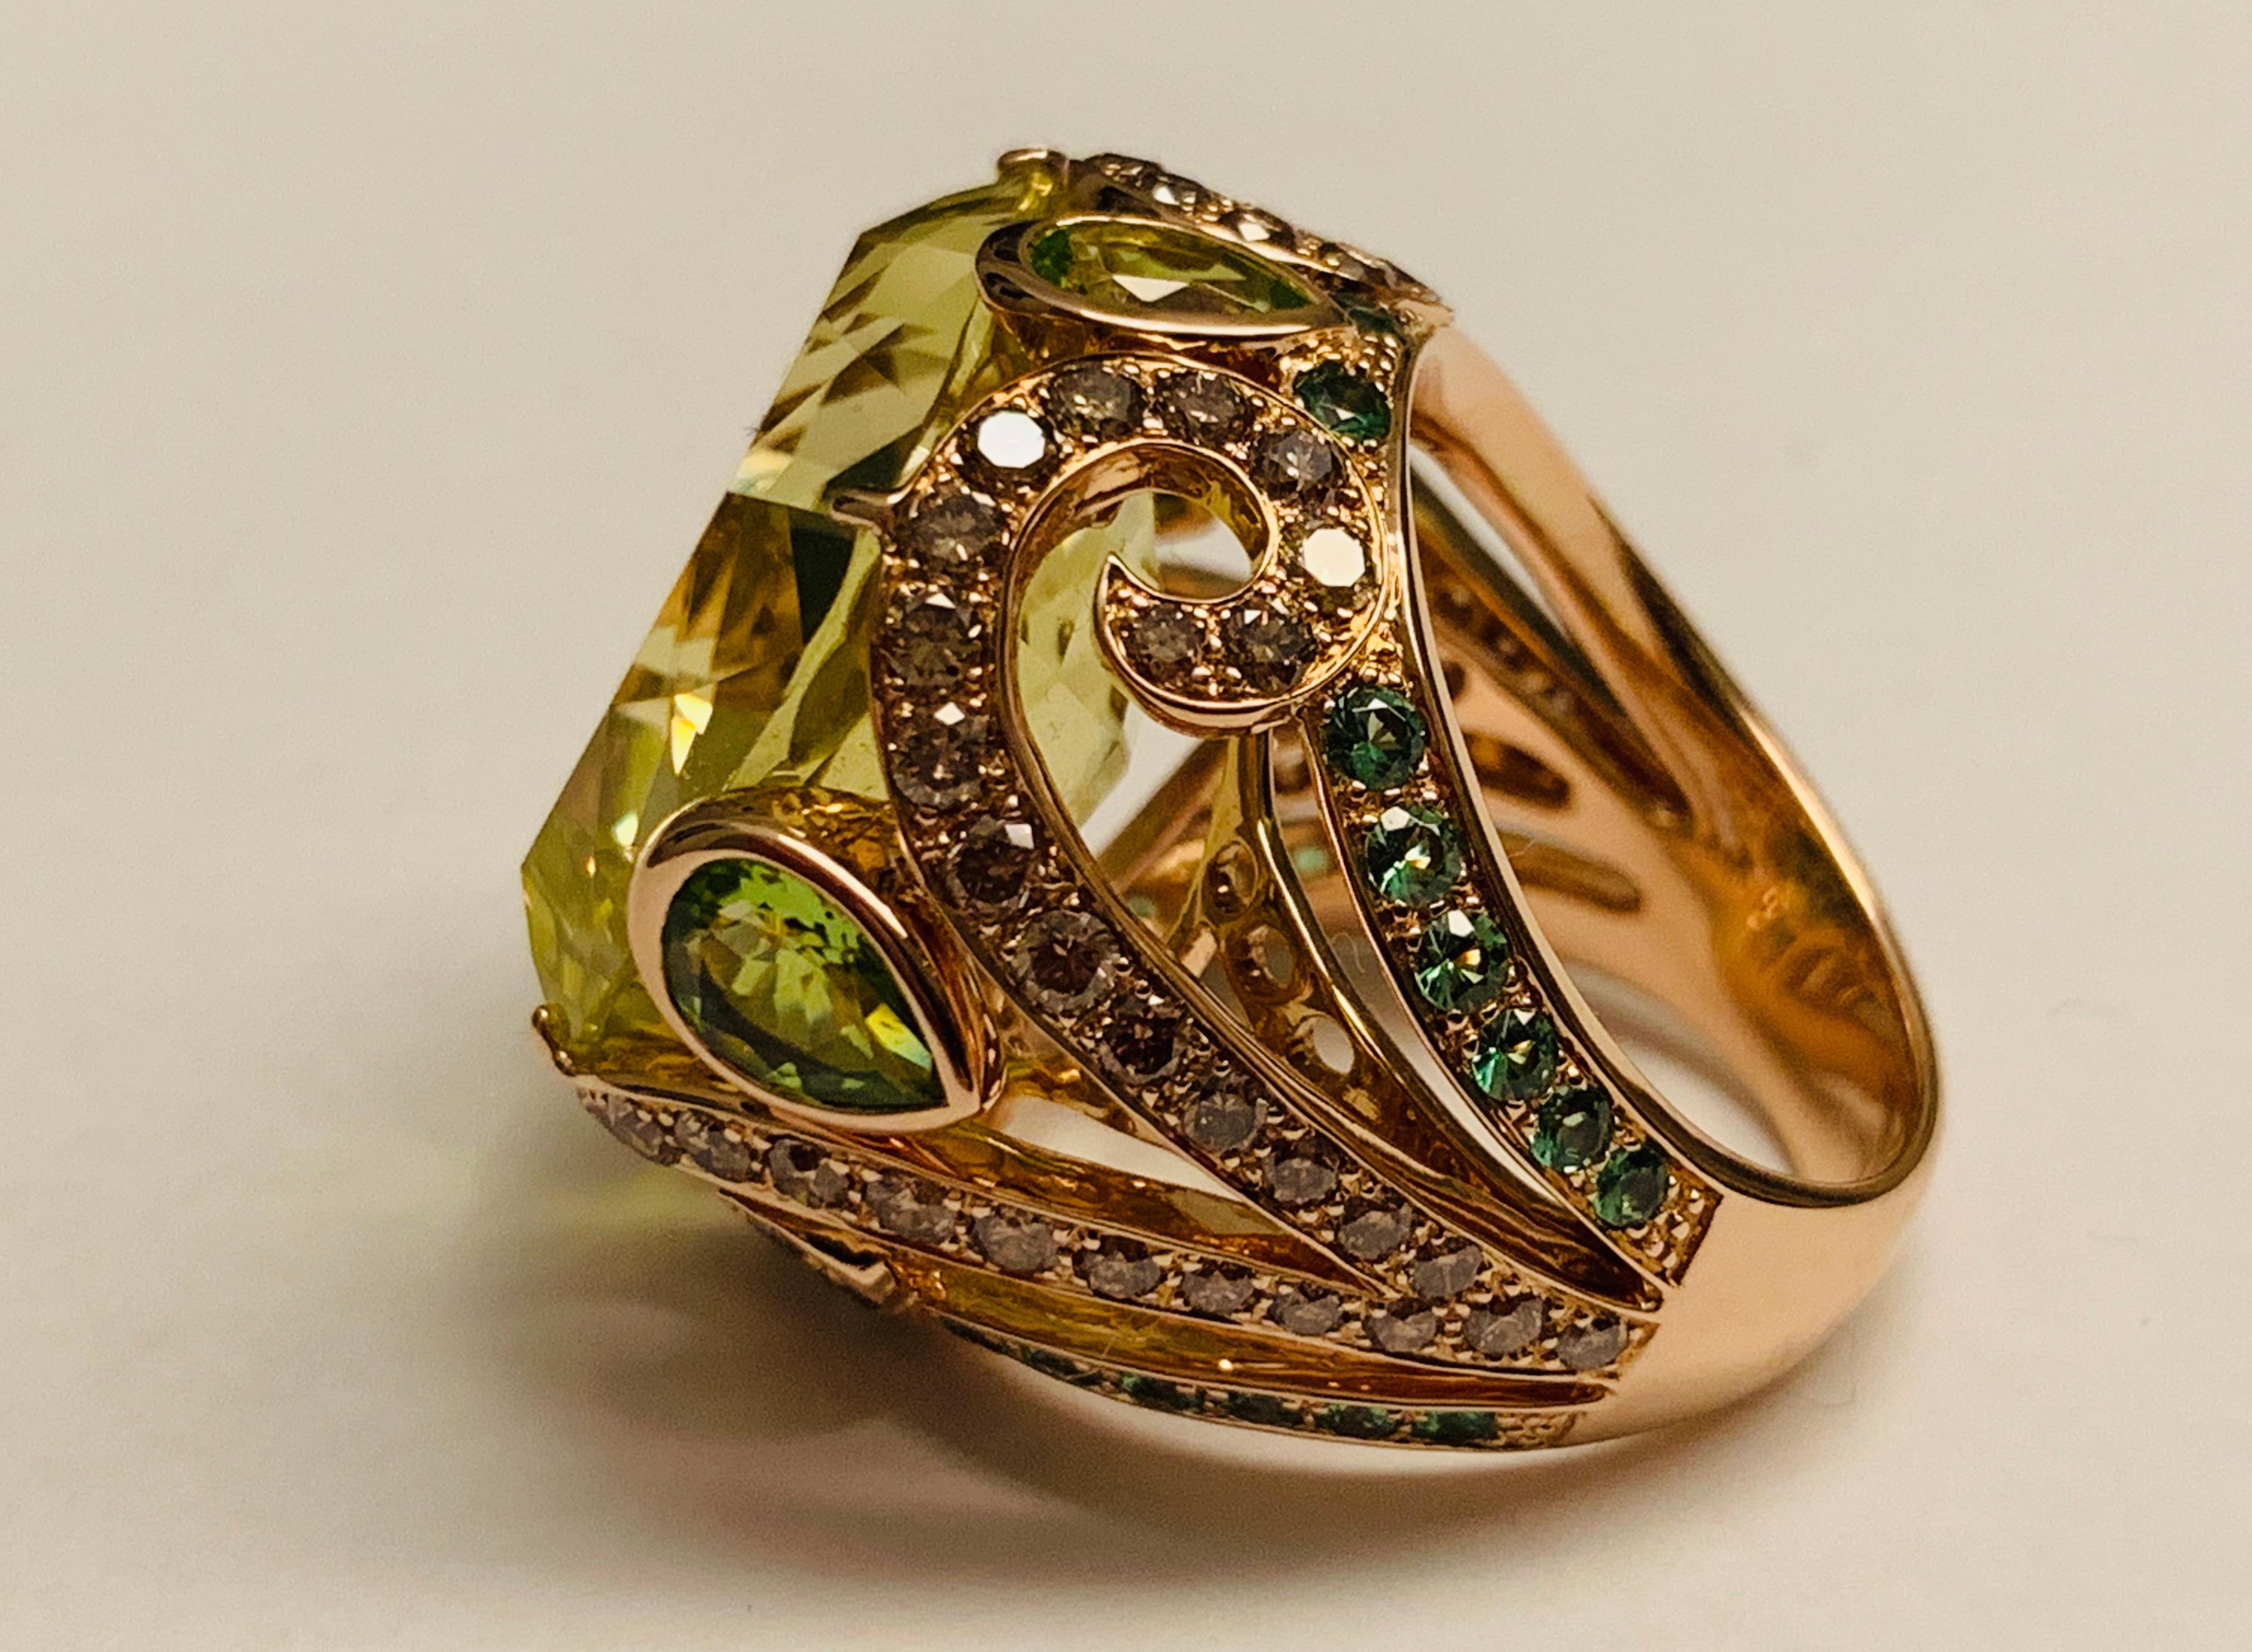 This statement Cocktail Ring centering a large cushion shaped vivid yellowish green lemon citrine. Surrounded by Champagne colored glittering diamonds and Tsavorite garnets, all fancifully set in 18 K Rosegold.
The ring is currently size 54/14 but